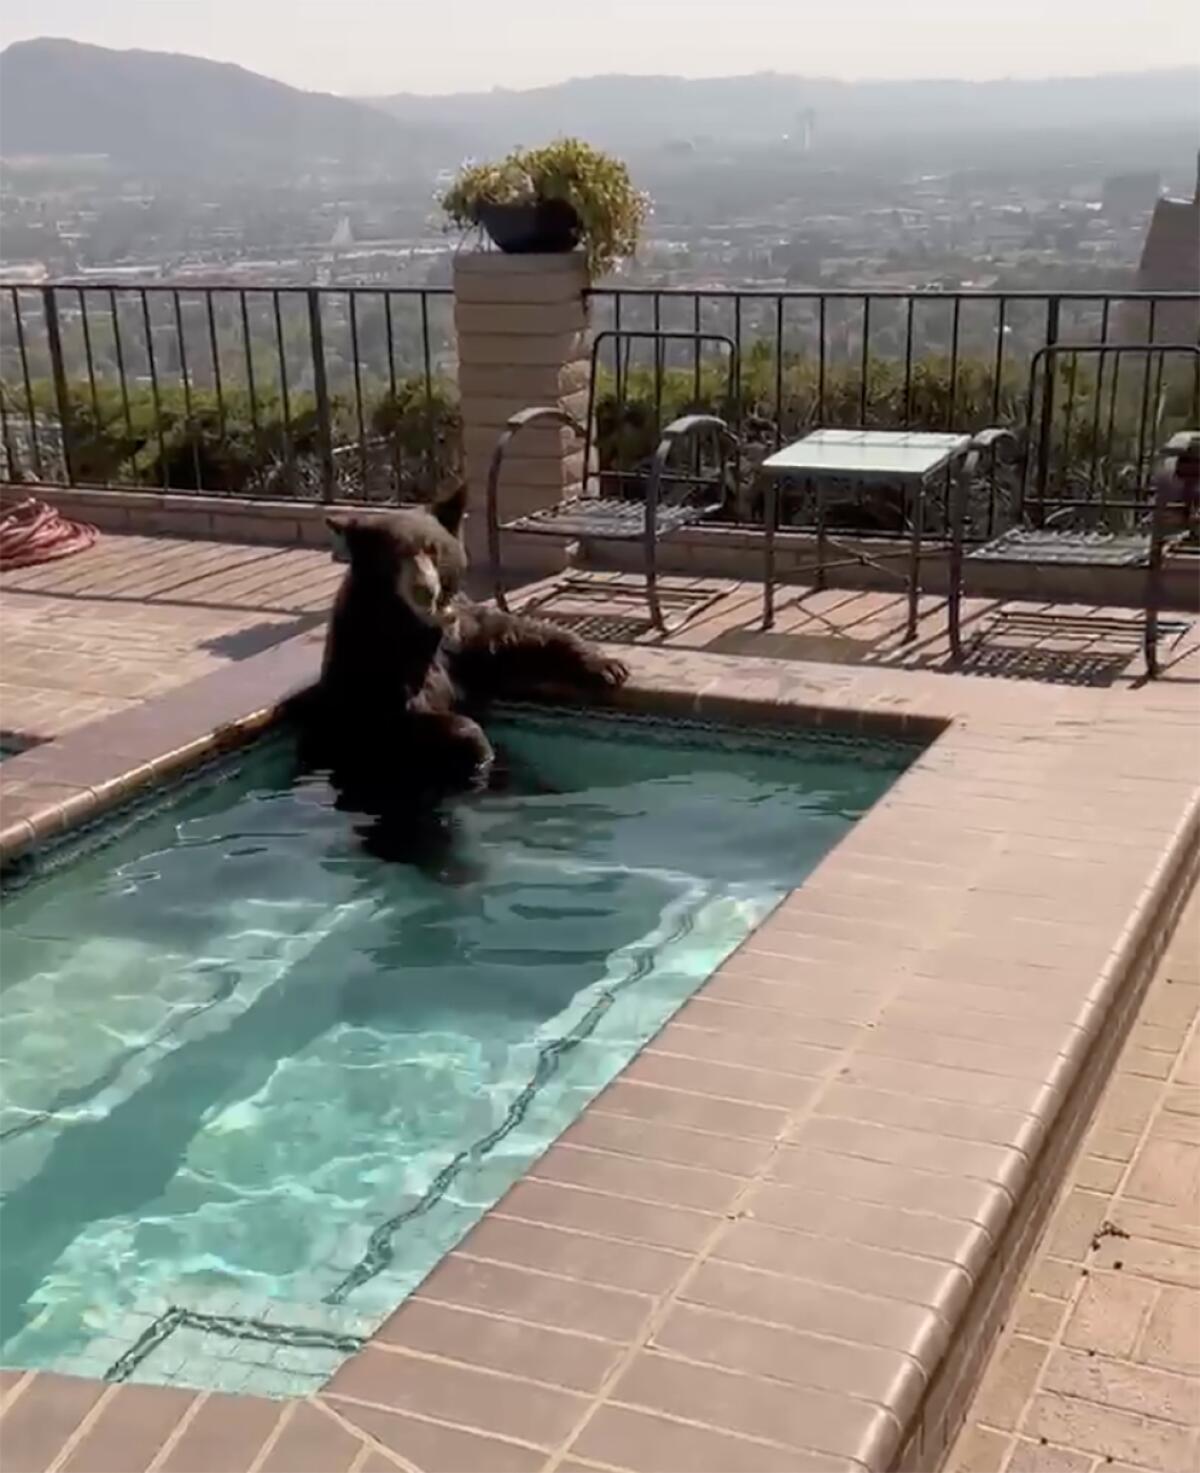 Video still of a bear hanging out in a hot tub in Burbank.